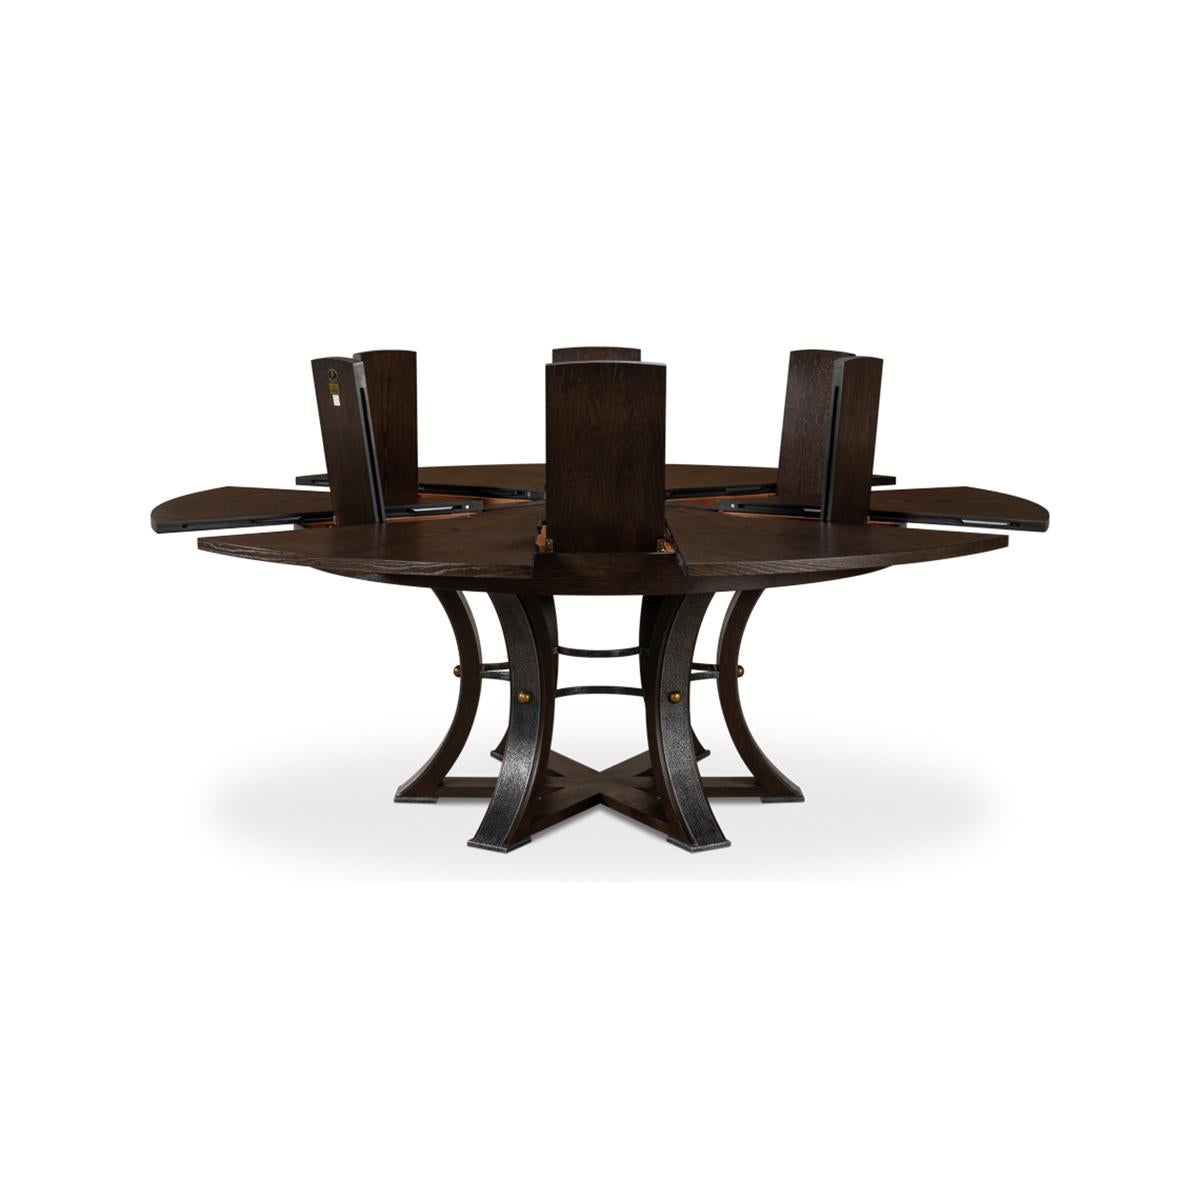 Vietnamese Large Modern Industrial Dining Table - 84 - Burnt Brown For Sale